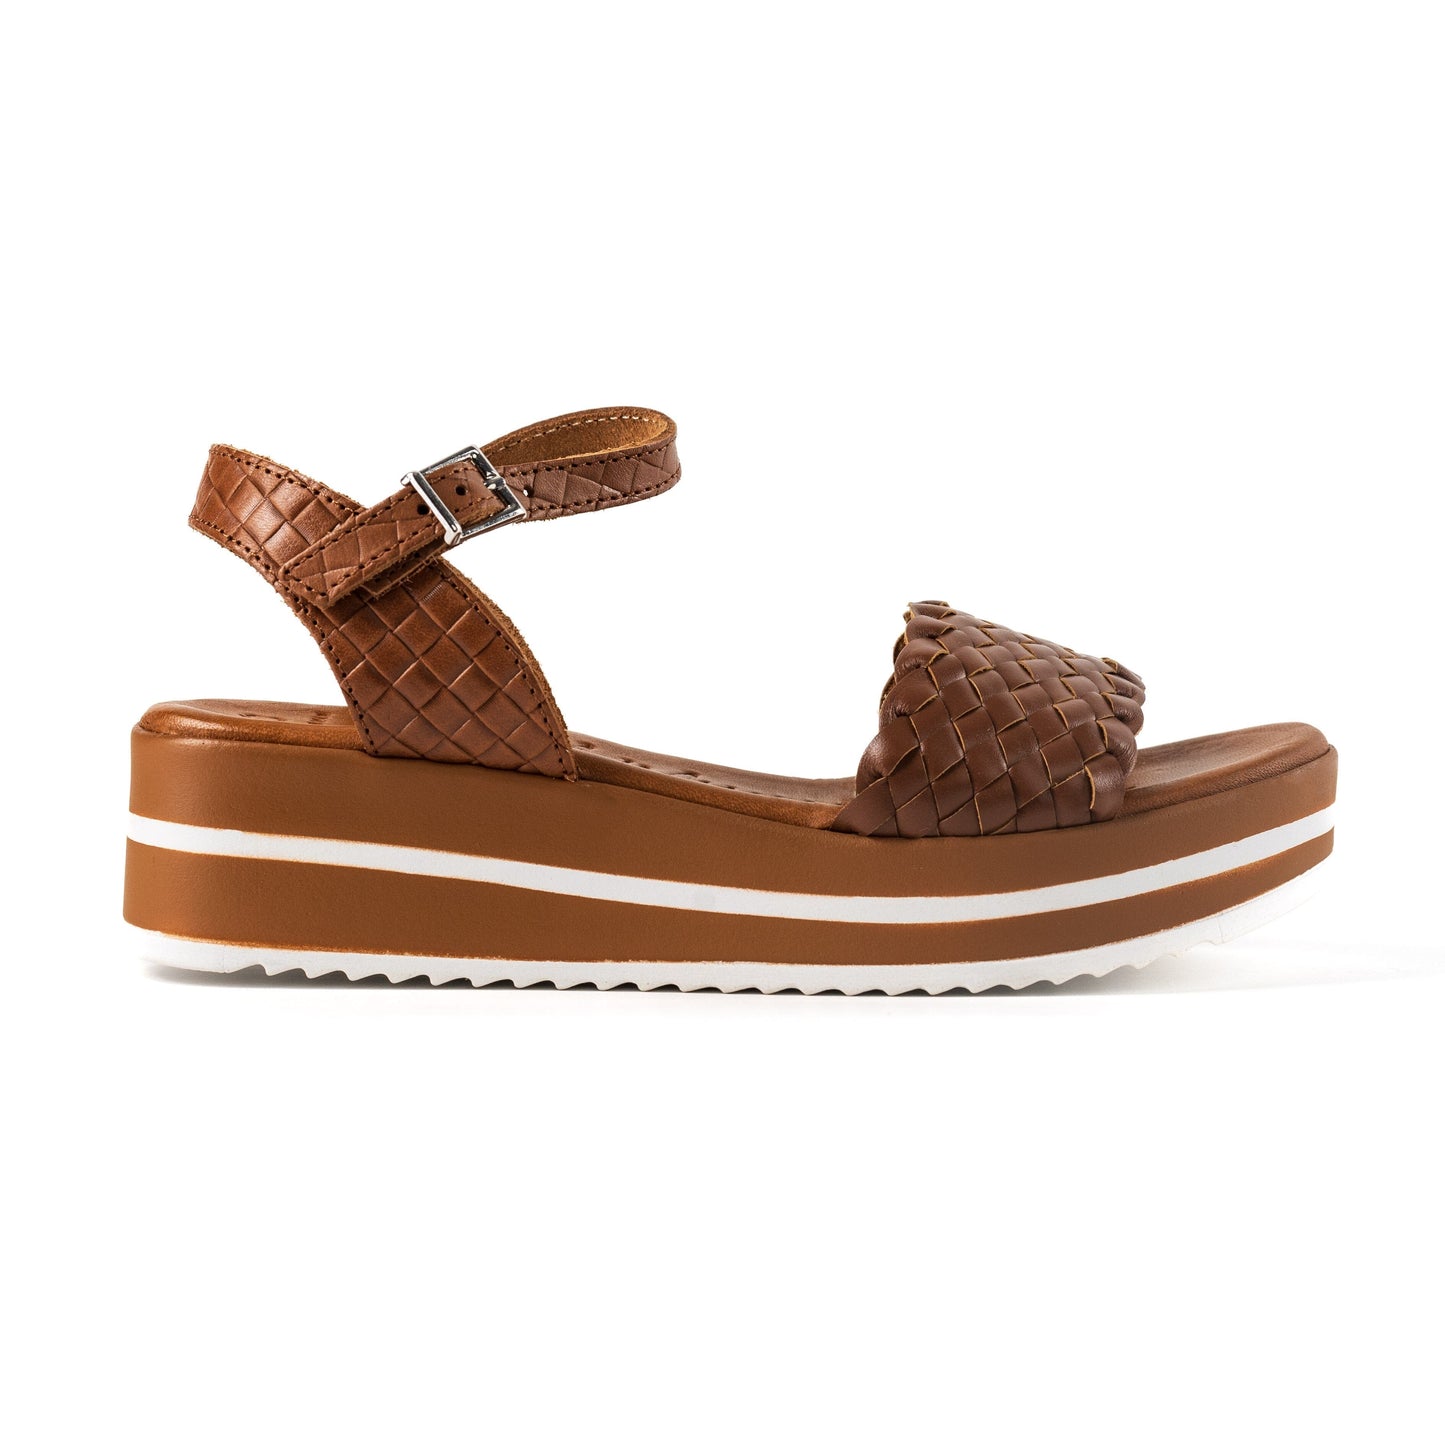 5276TB Spanish leather woven sandals/wedge in Tan – Sam Star Shoes